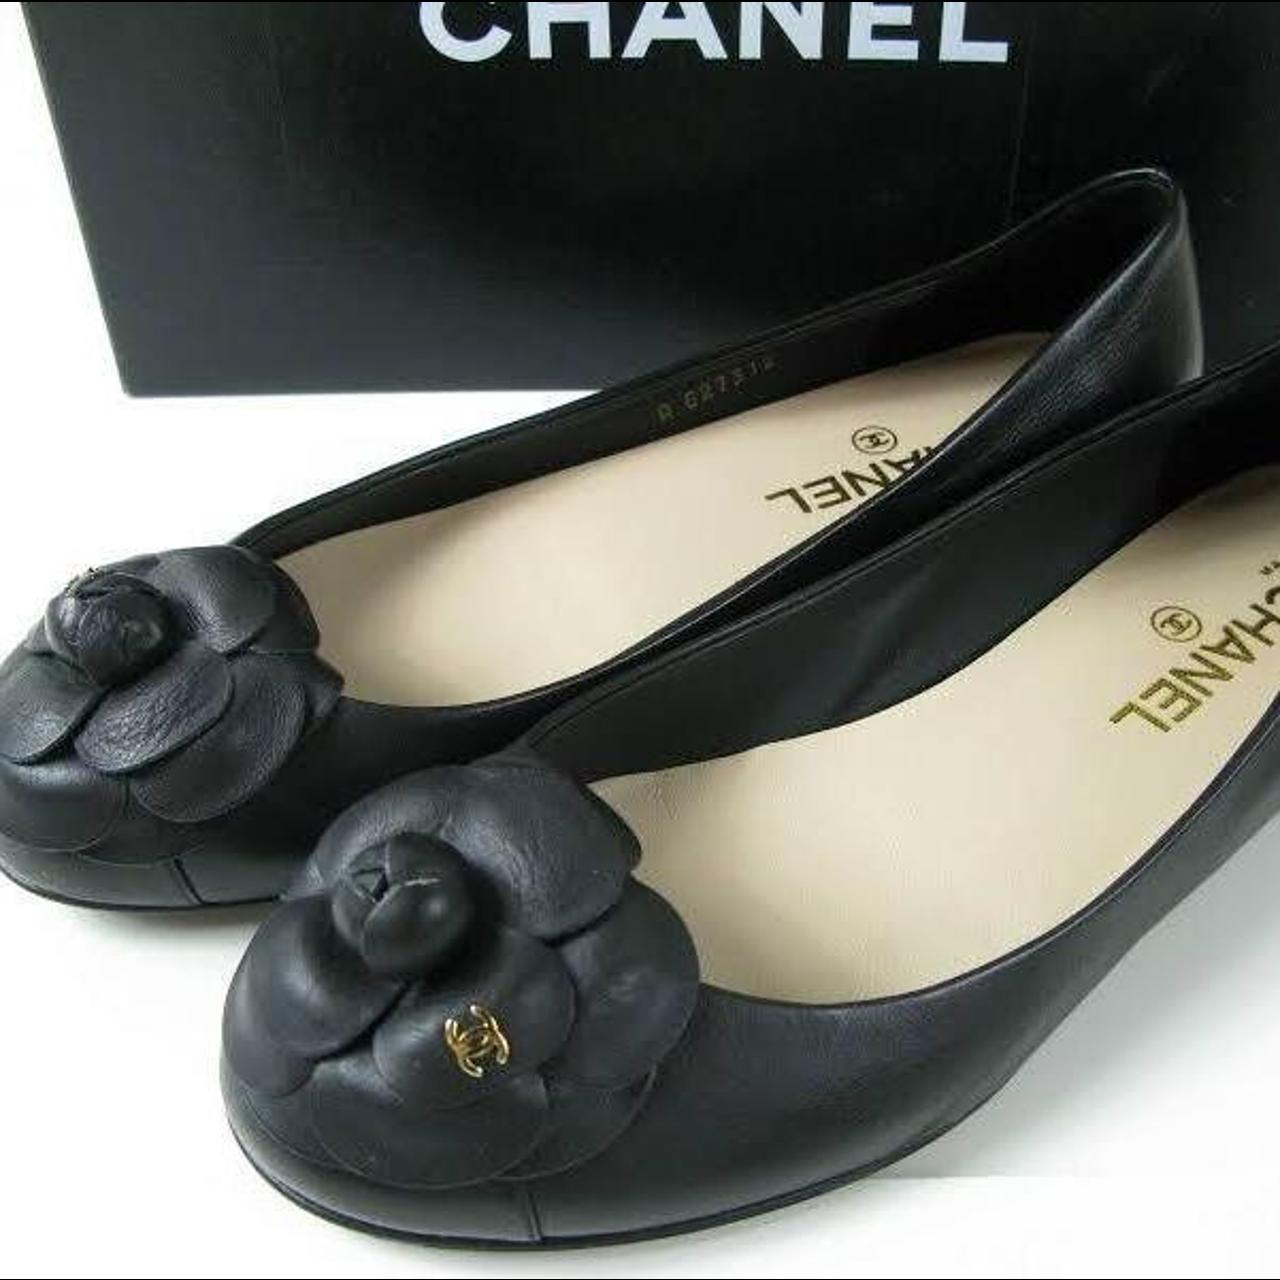 Black pre-owned Chanel leather ballet flats